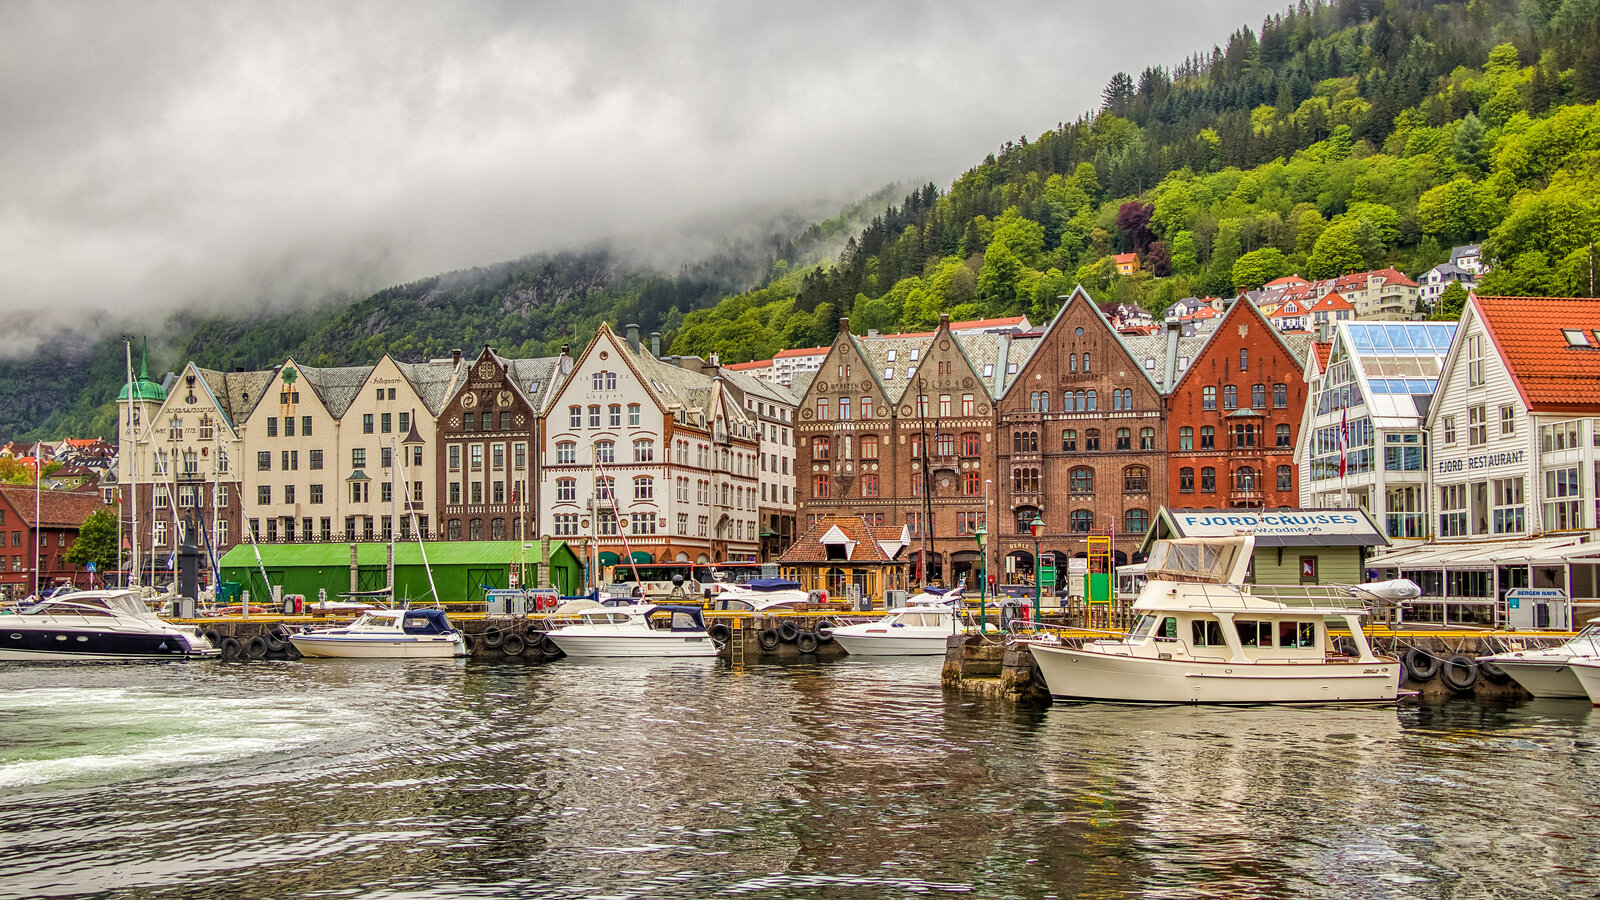 How to Apply for Permanent Residency in Norway